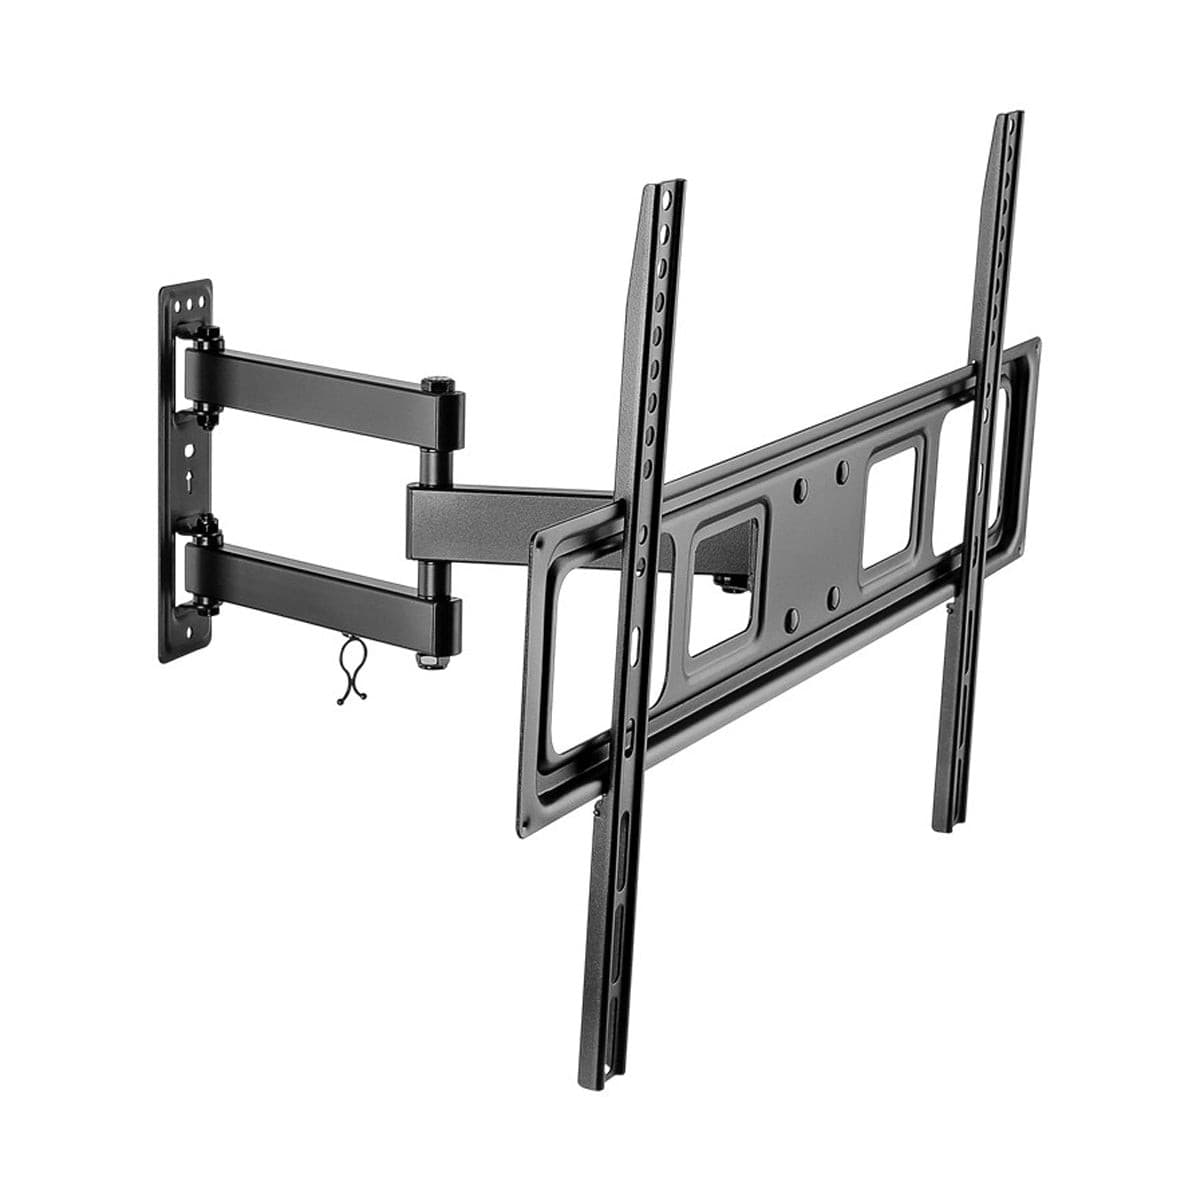 Goobay TV Wall Mount Basic FULLMOTION Large for TVs 37 to 70 inch.